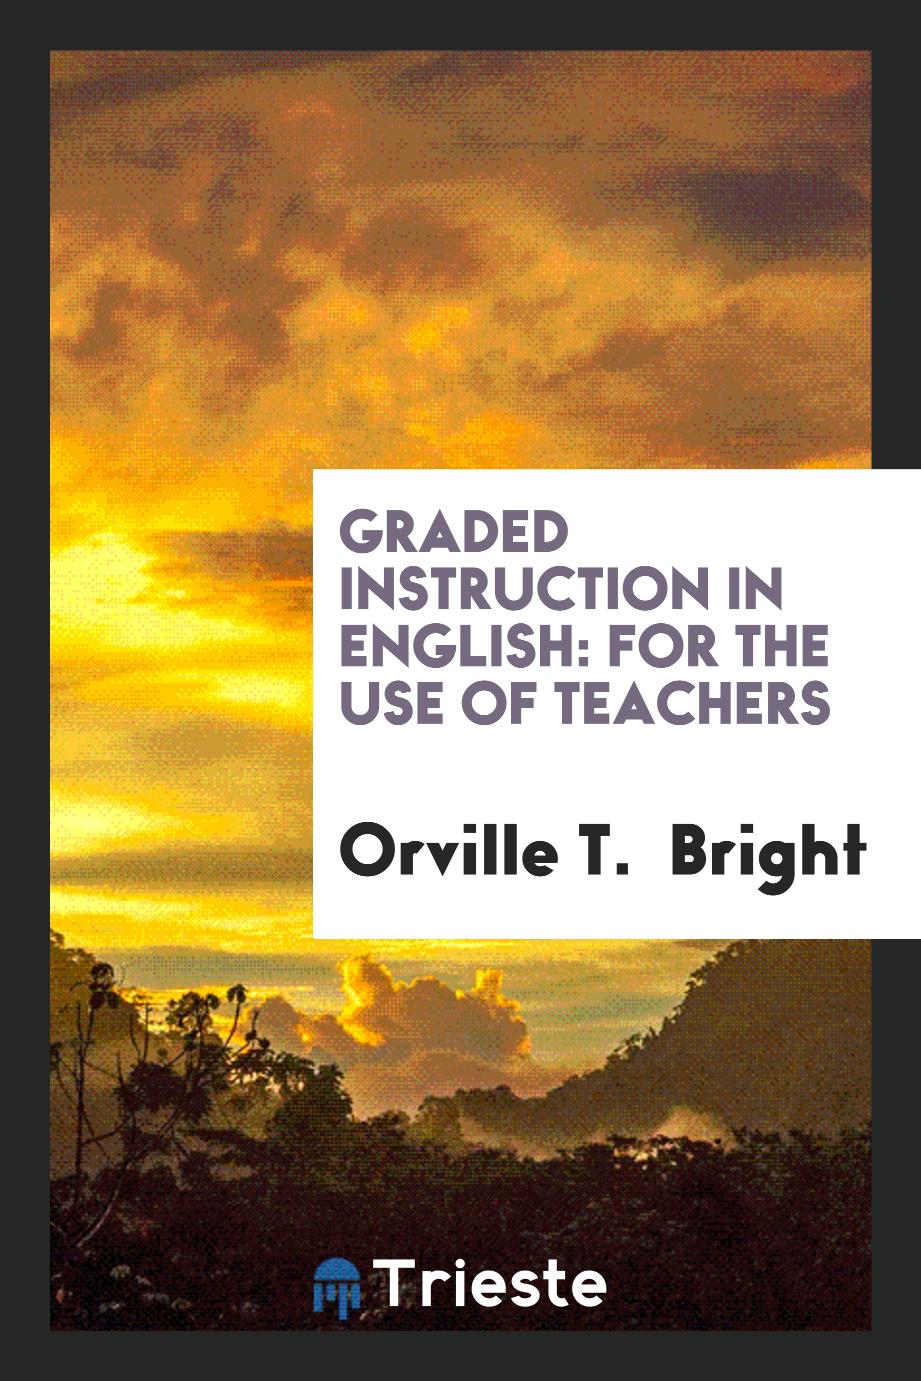 Graded Instruction in English: For the Use of Teachers